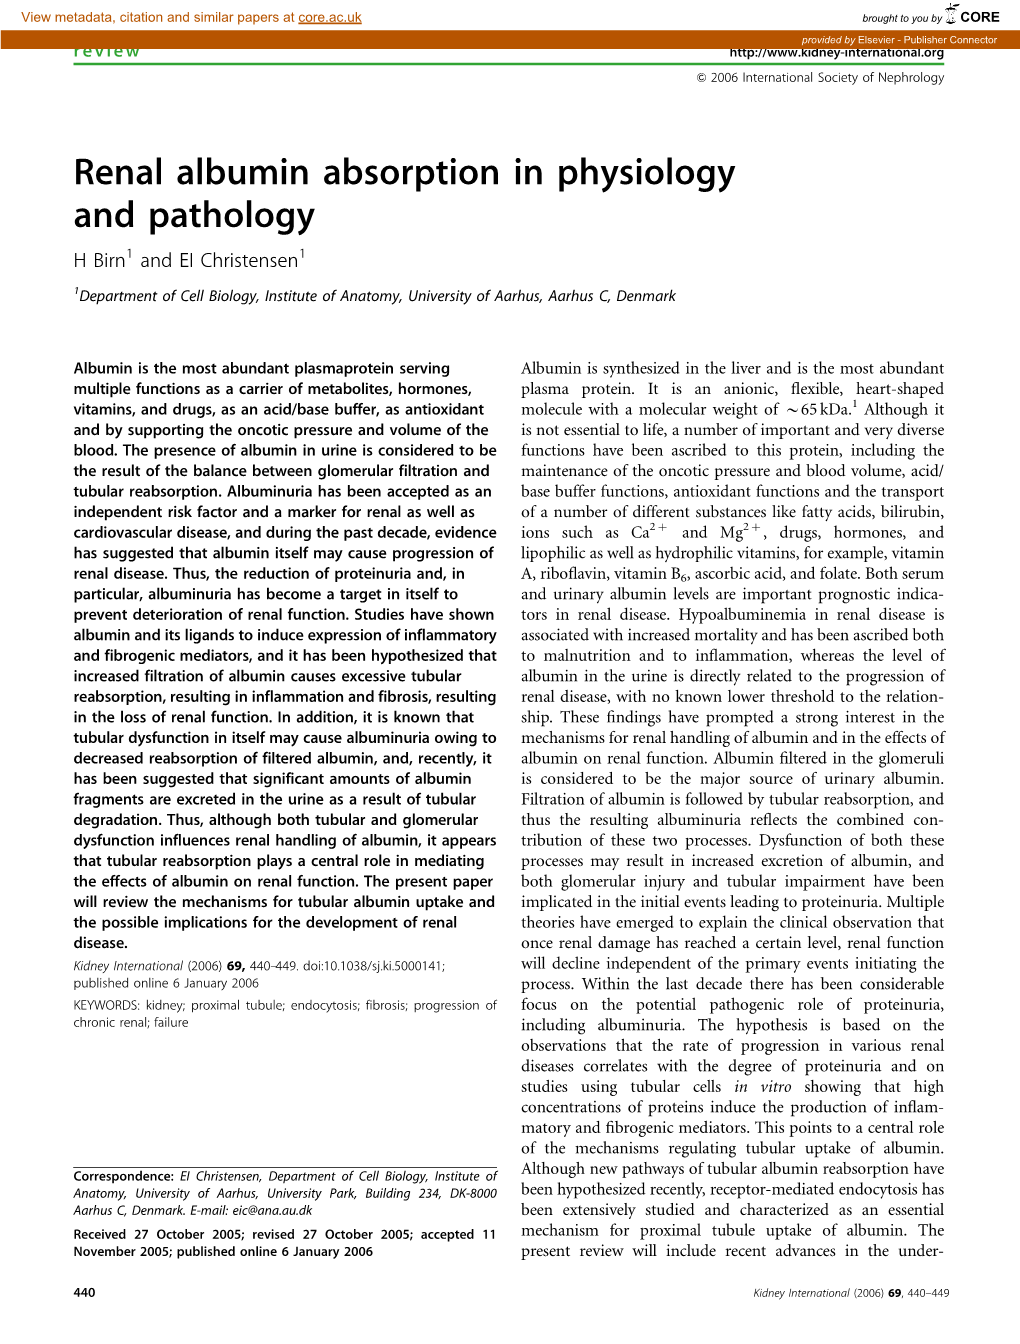 Renal Albumin Absorption in Physiology and Pathology H Birn1 and EI Christensen1